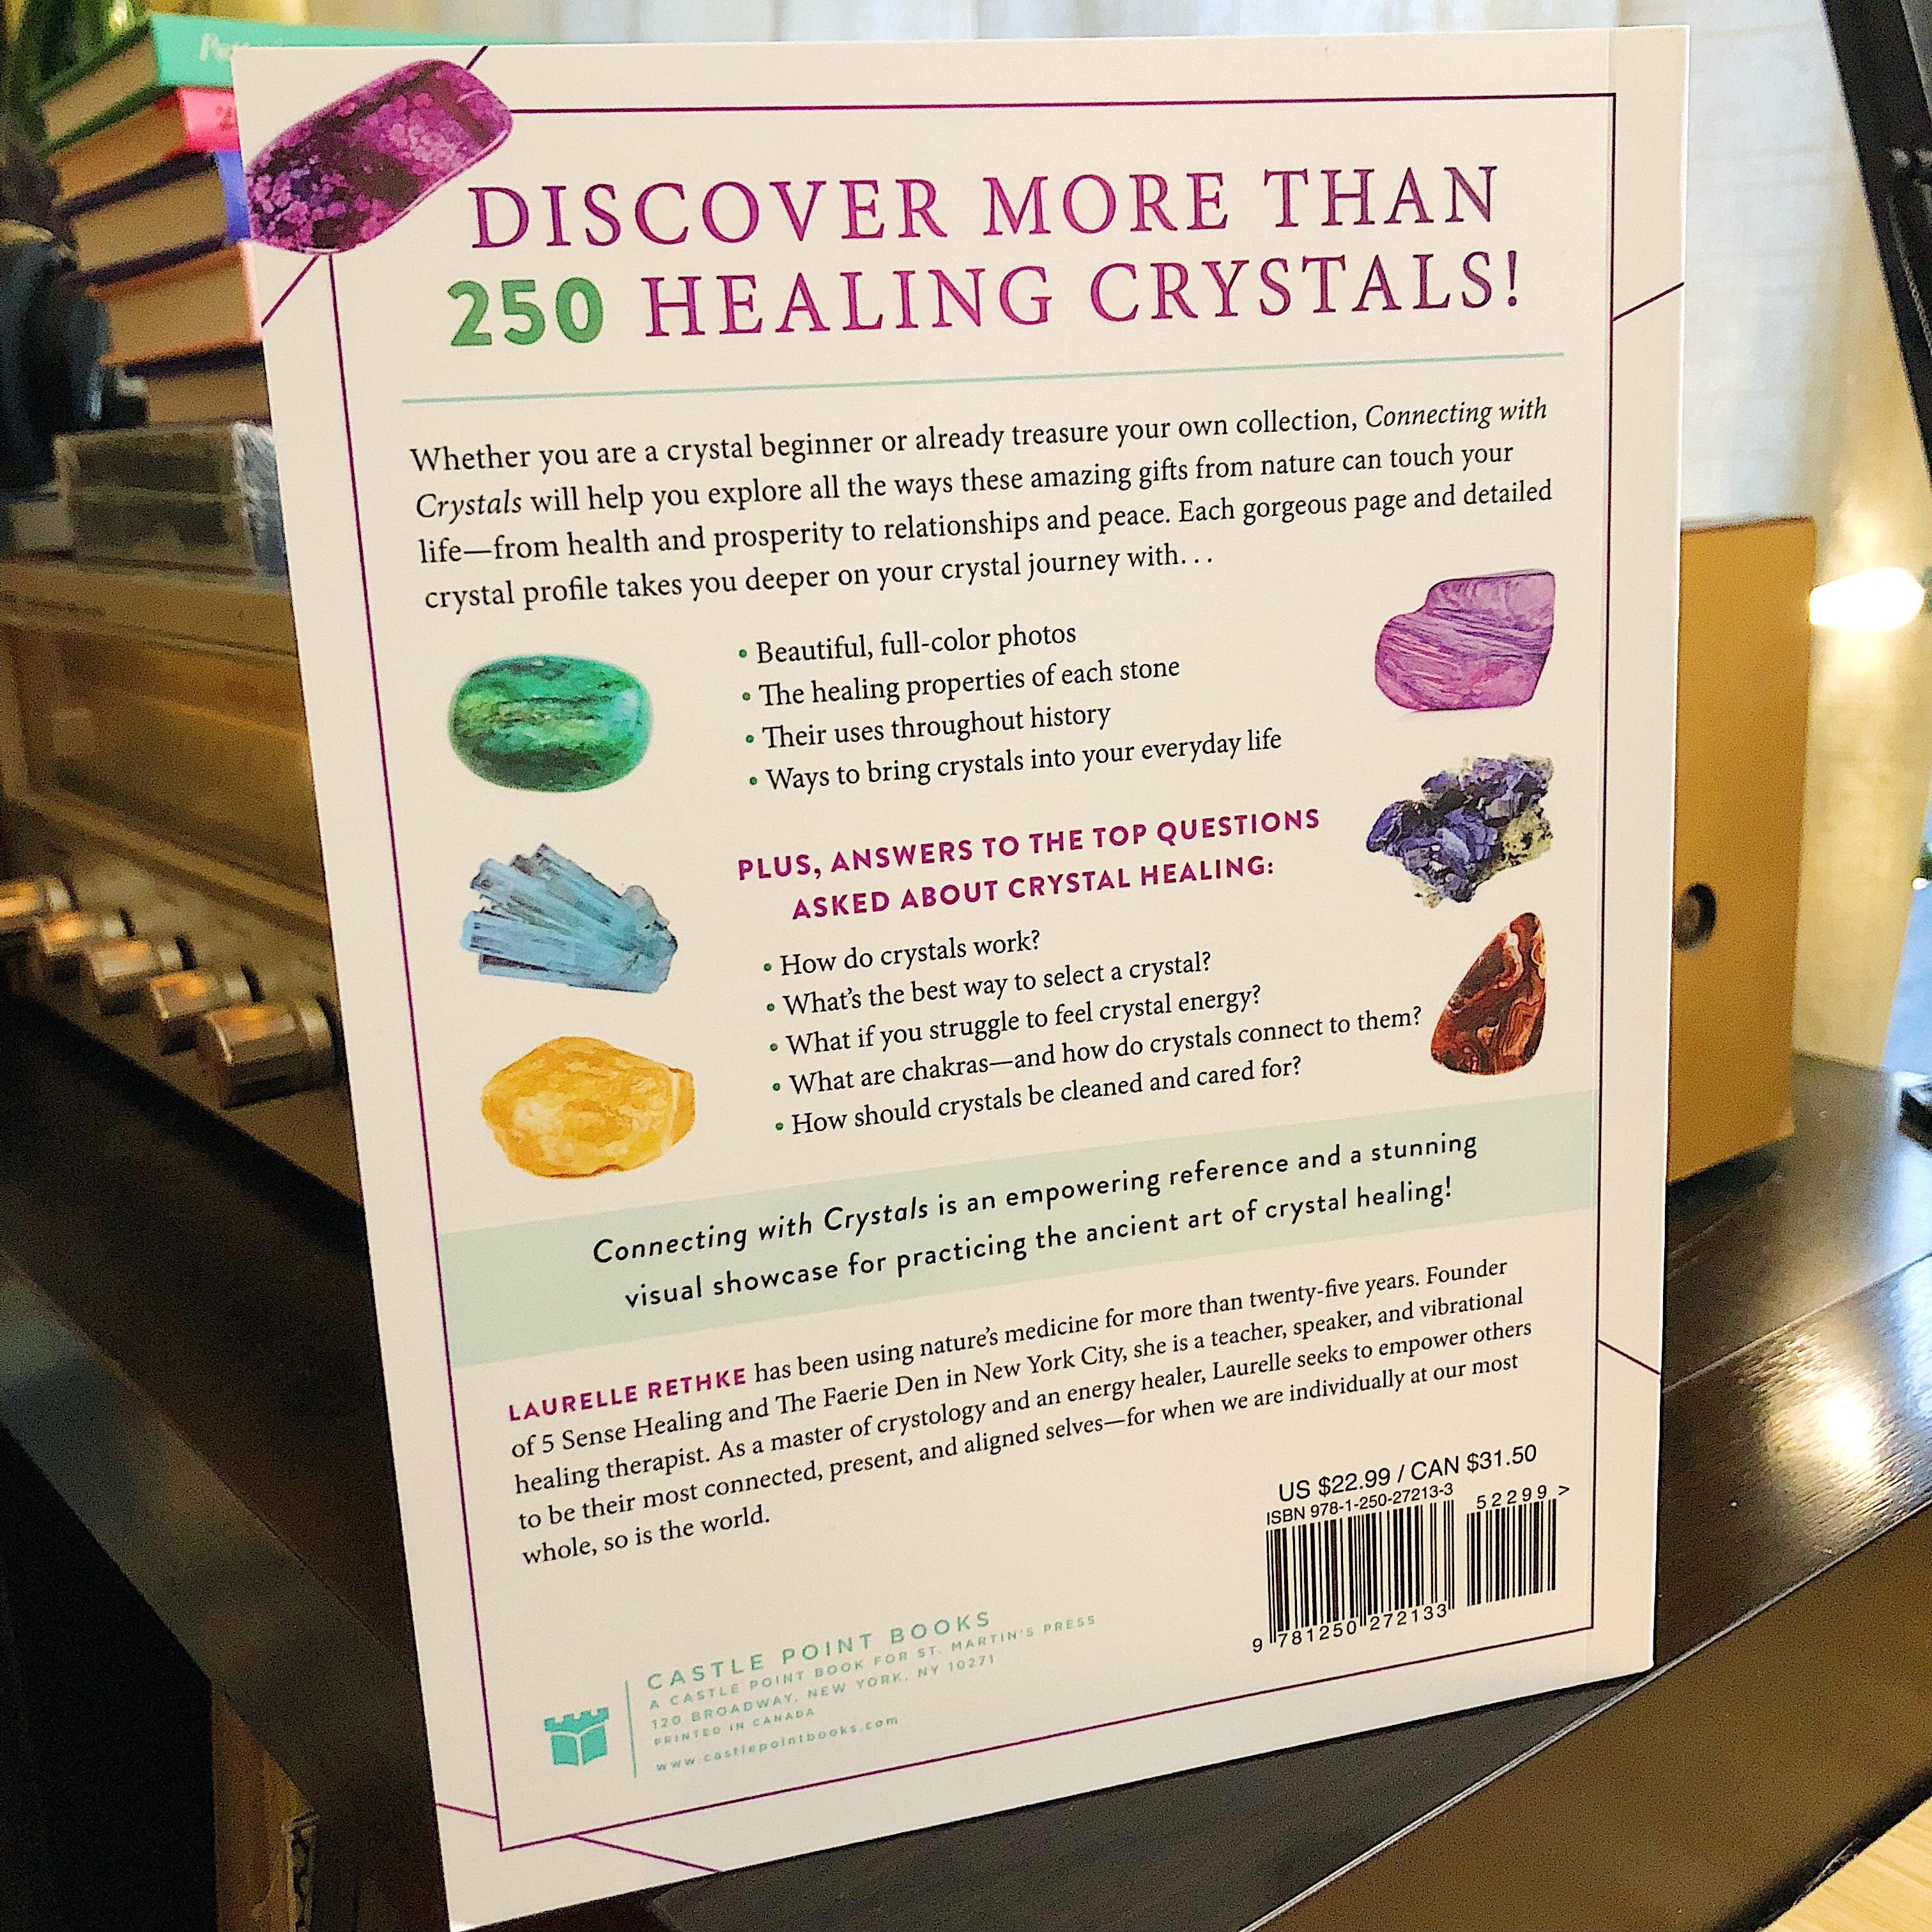 Connecting With Crystals: Crystal Wisdom And Stone Healing For Body, Mind, And Spirit // By Laurelle Rethke